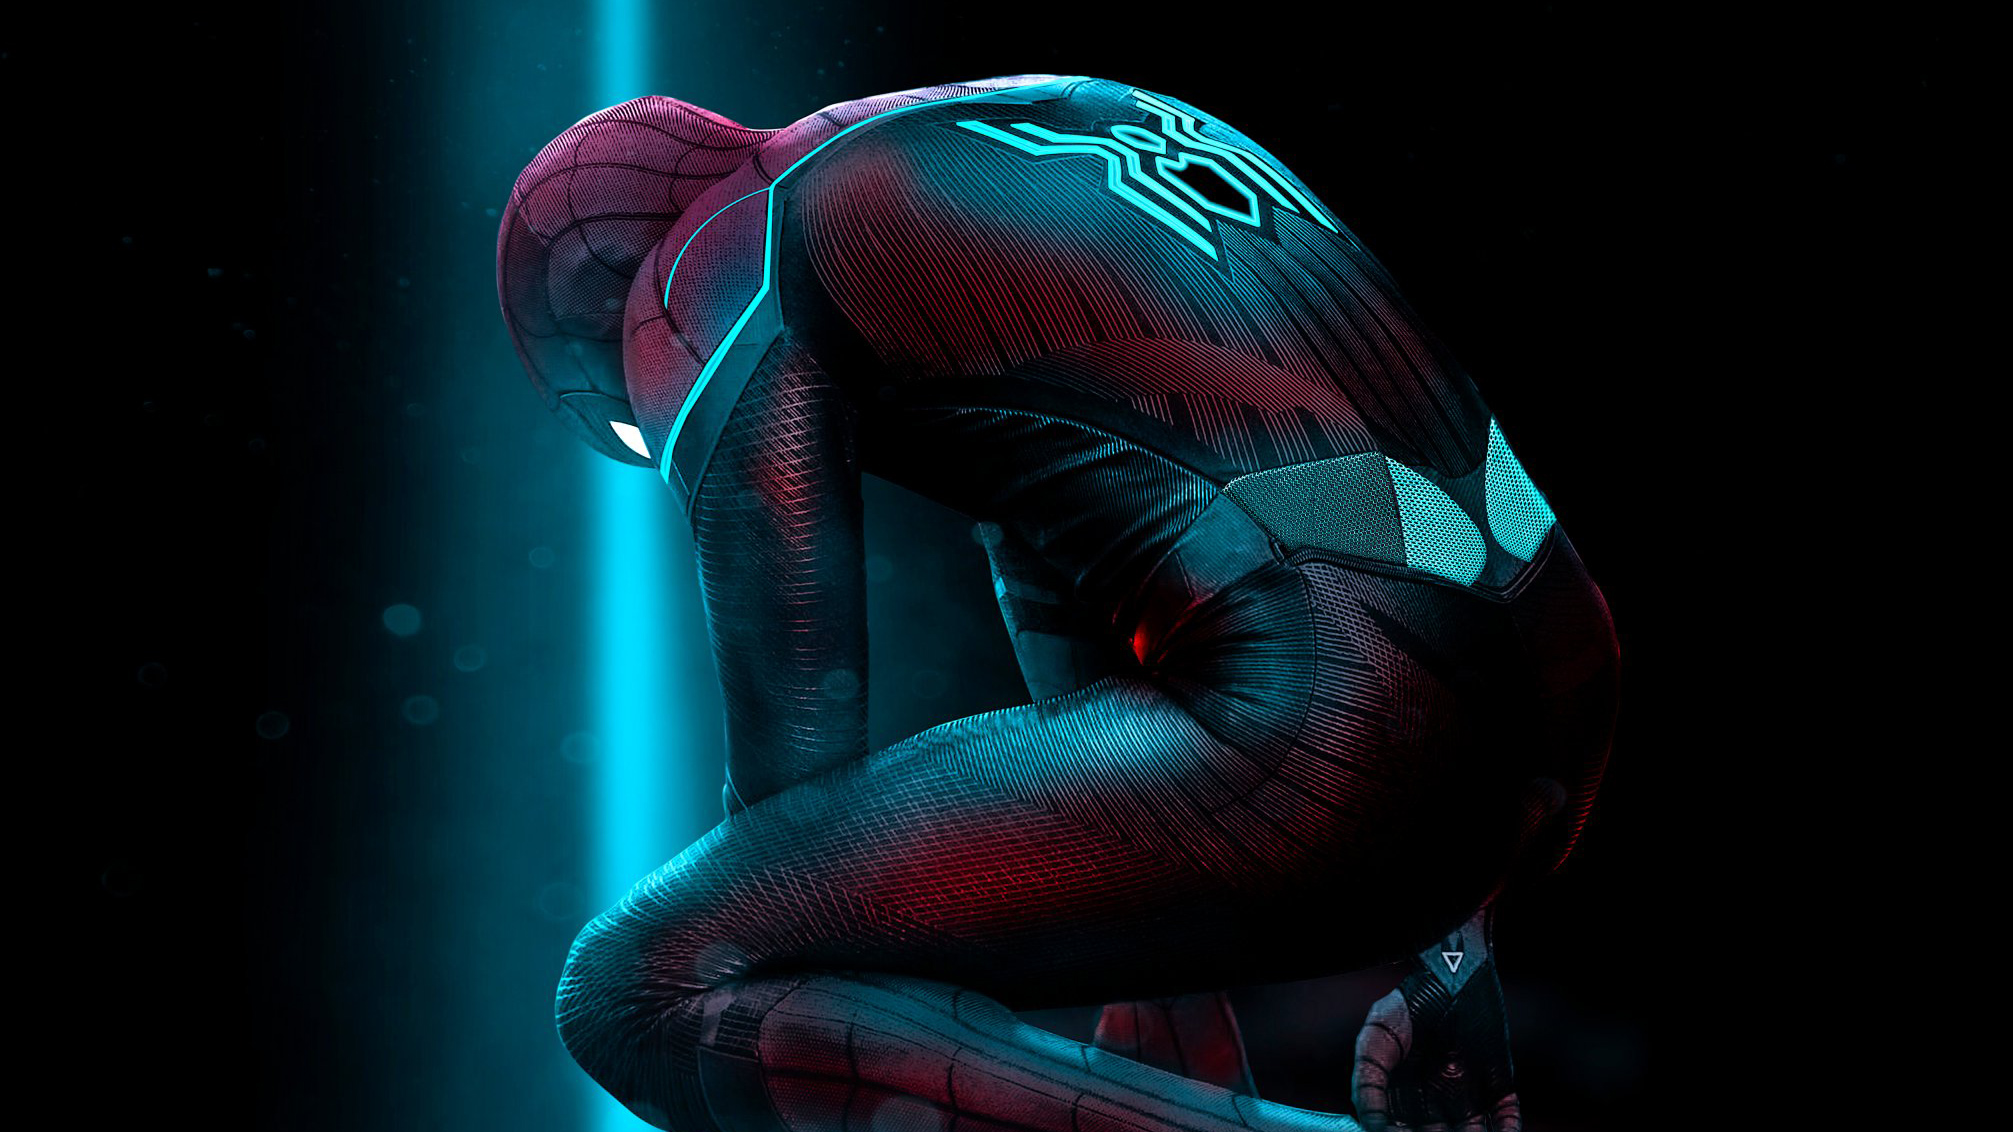 Spider-Man HD Wallpapers and Backgrounds. 